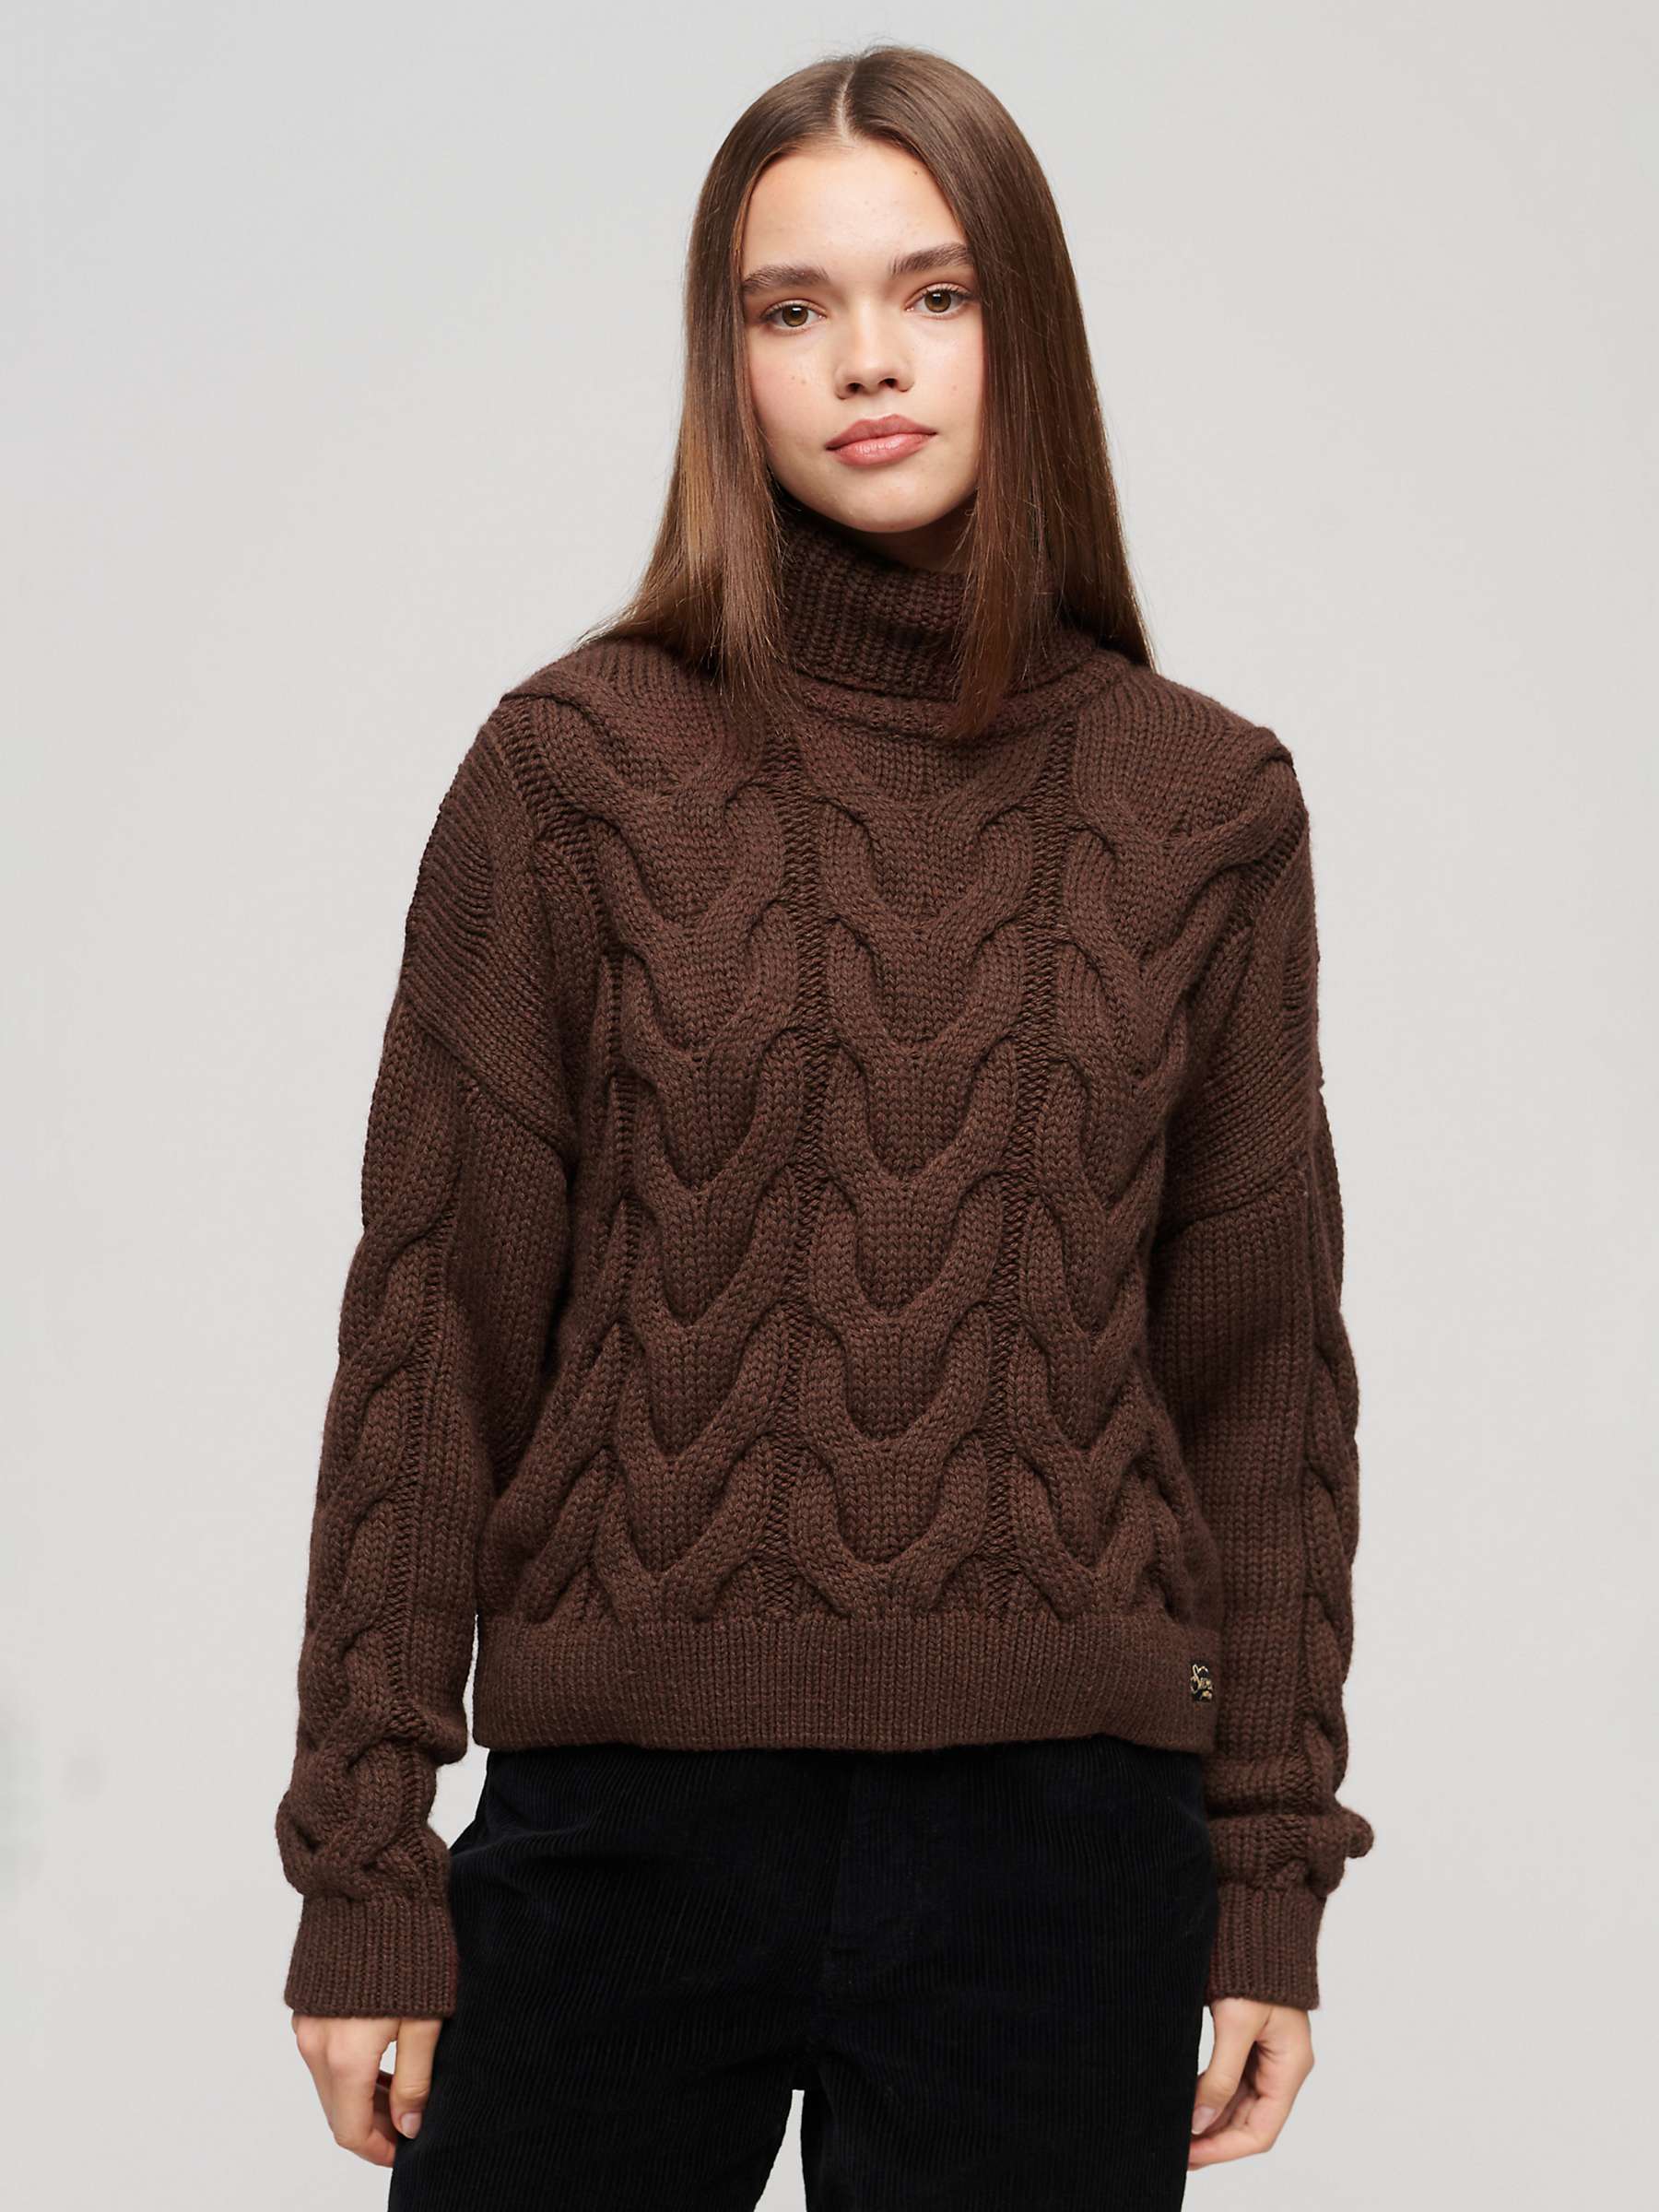 Buy Superdry Wool Blend Chain Cable Knit Polo Jumper Online at johnlewis.com